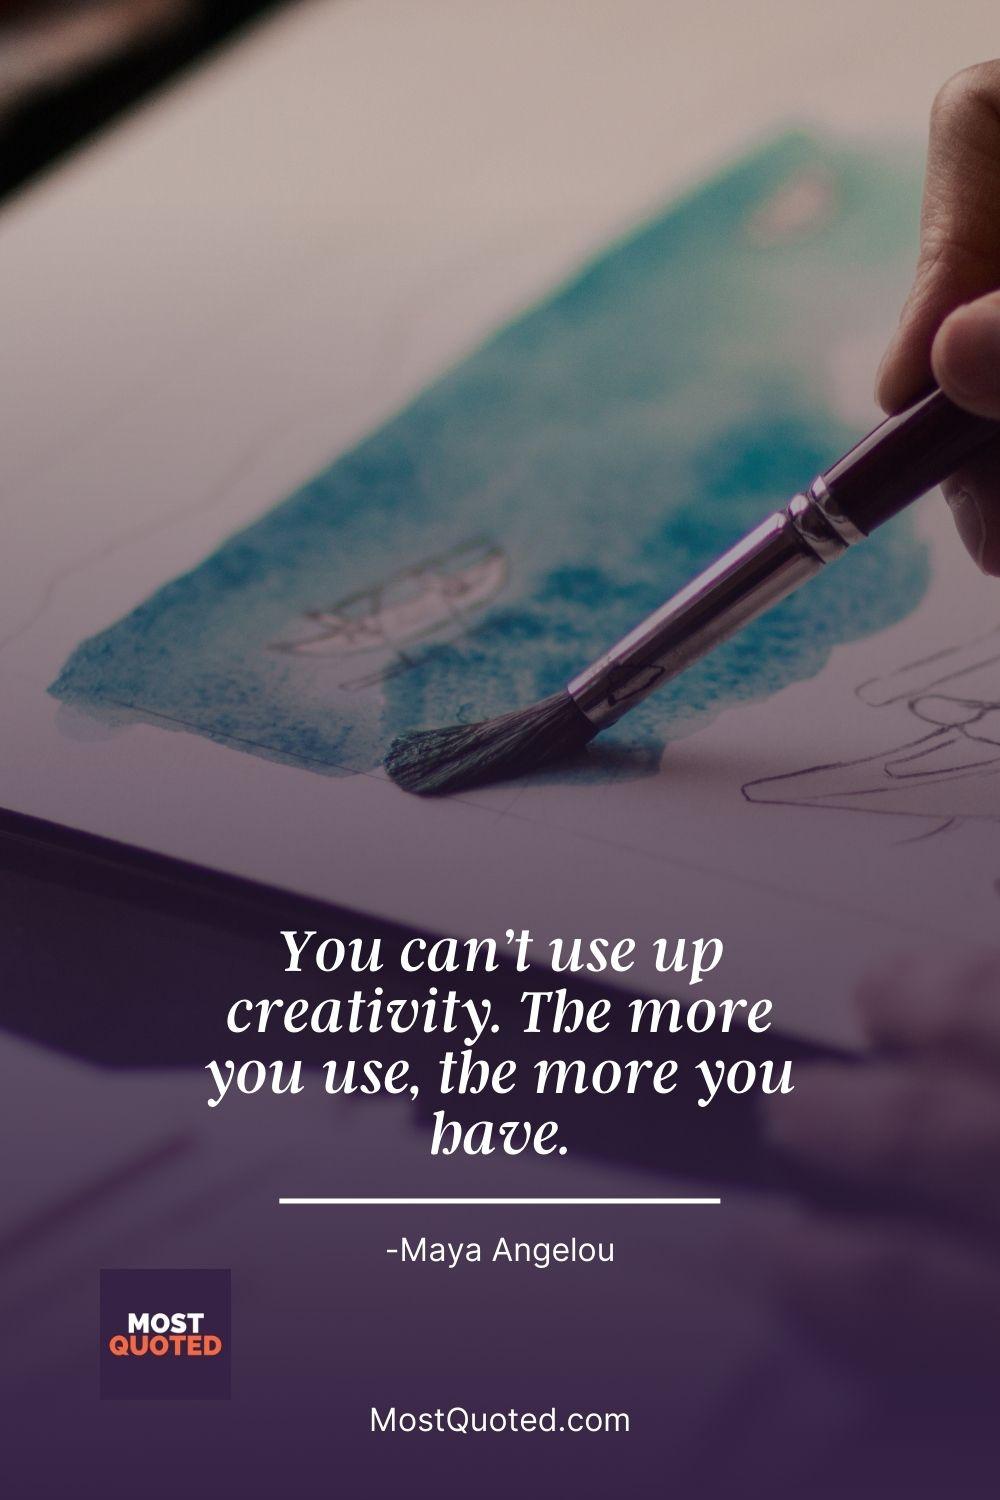 You can’t use up creativity. The more you use, the more you have. - Maya Angelou